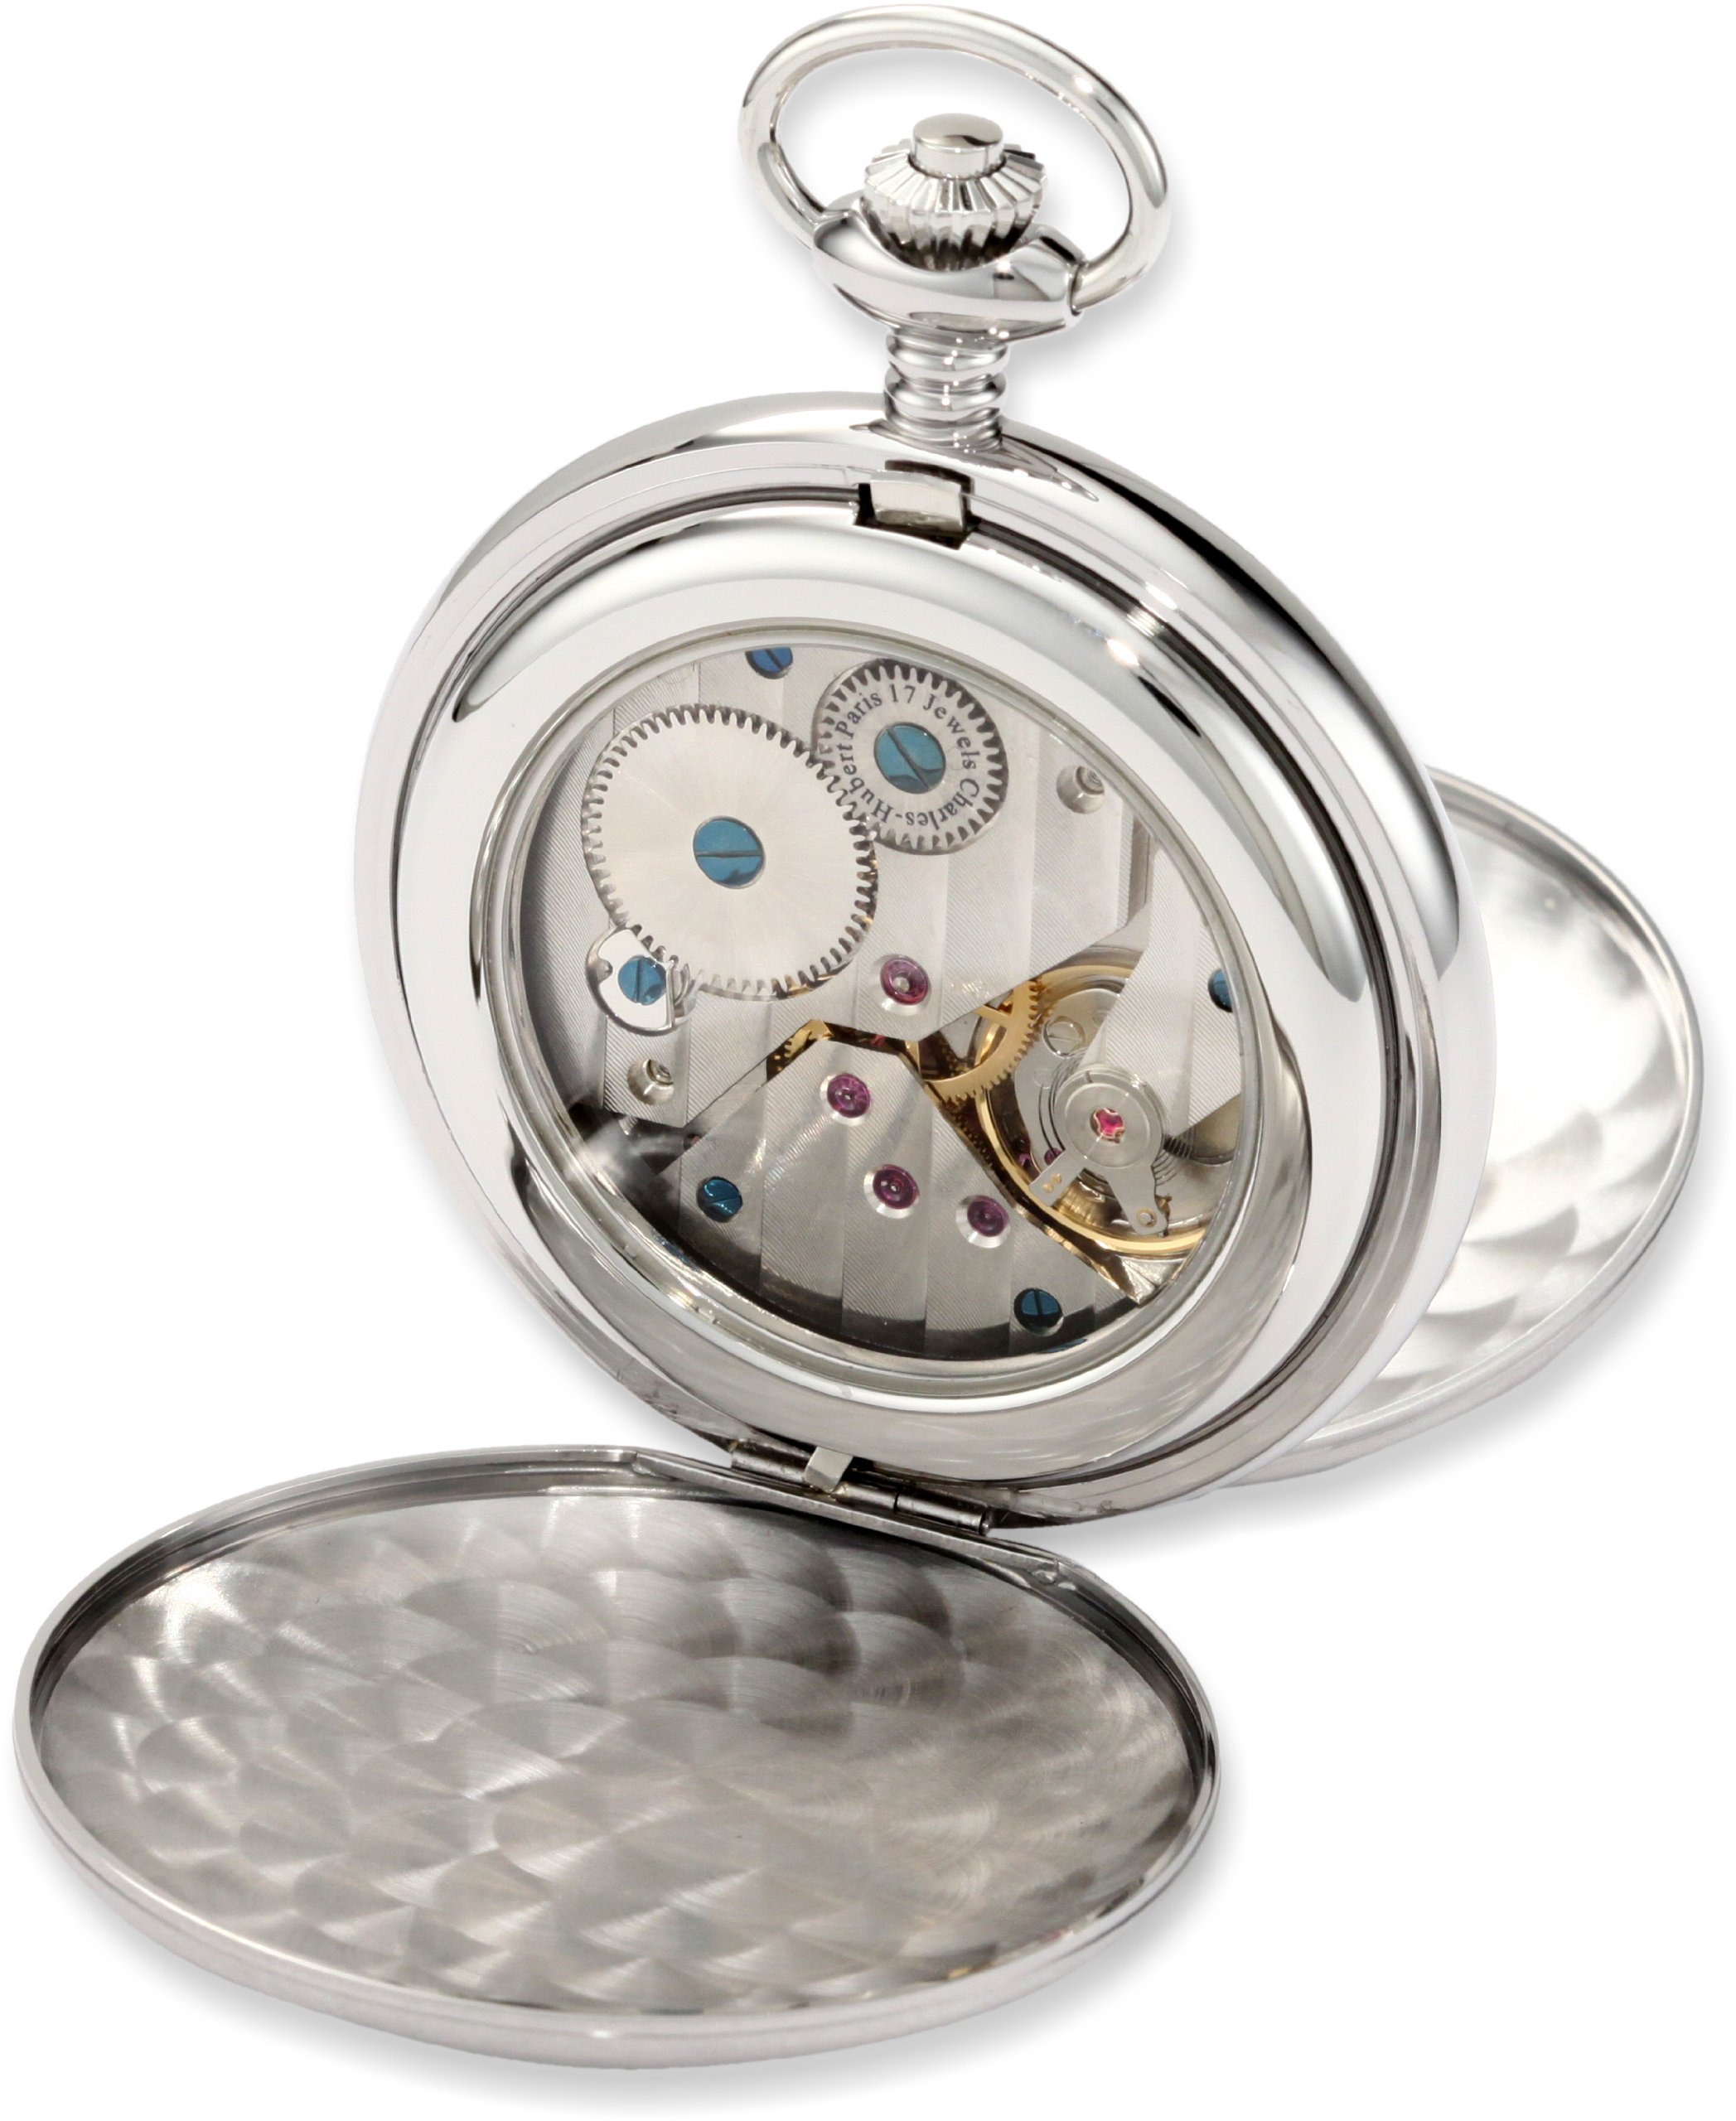 Charles-Hubert, Paris 3908-WR Premium Collection Stainless Steel Satin Finish Double Hunter Case Mechanical Pocket Watch